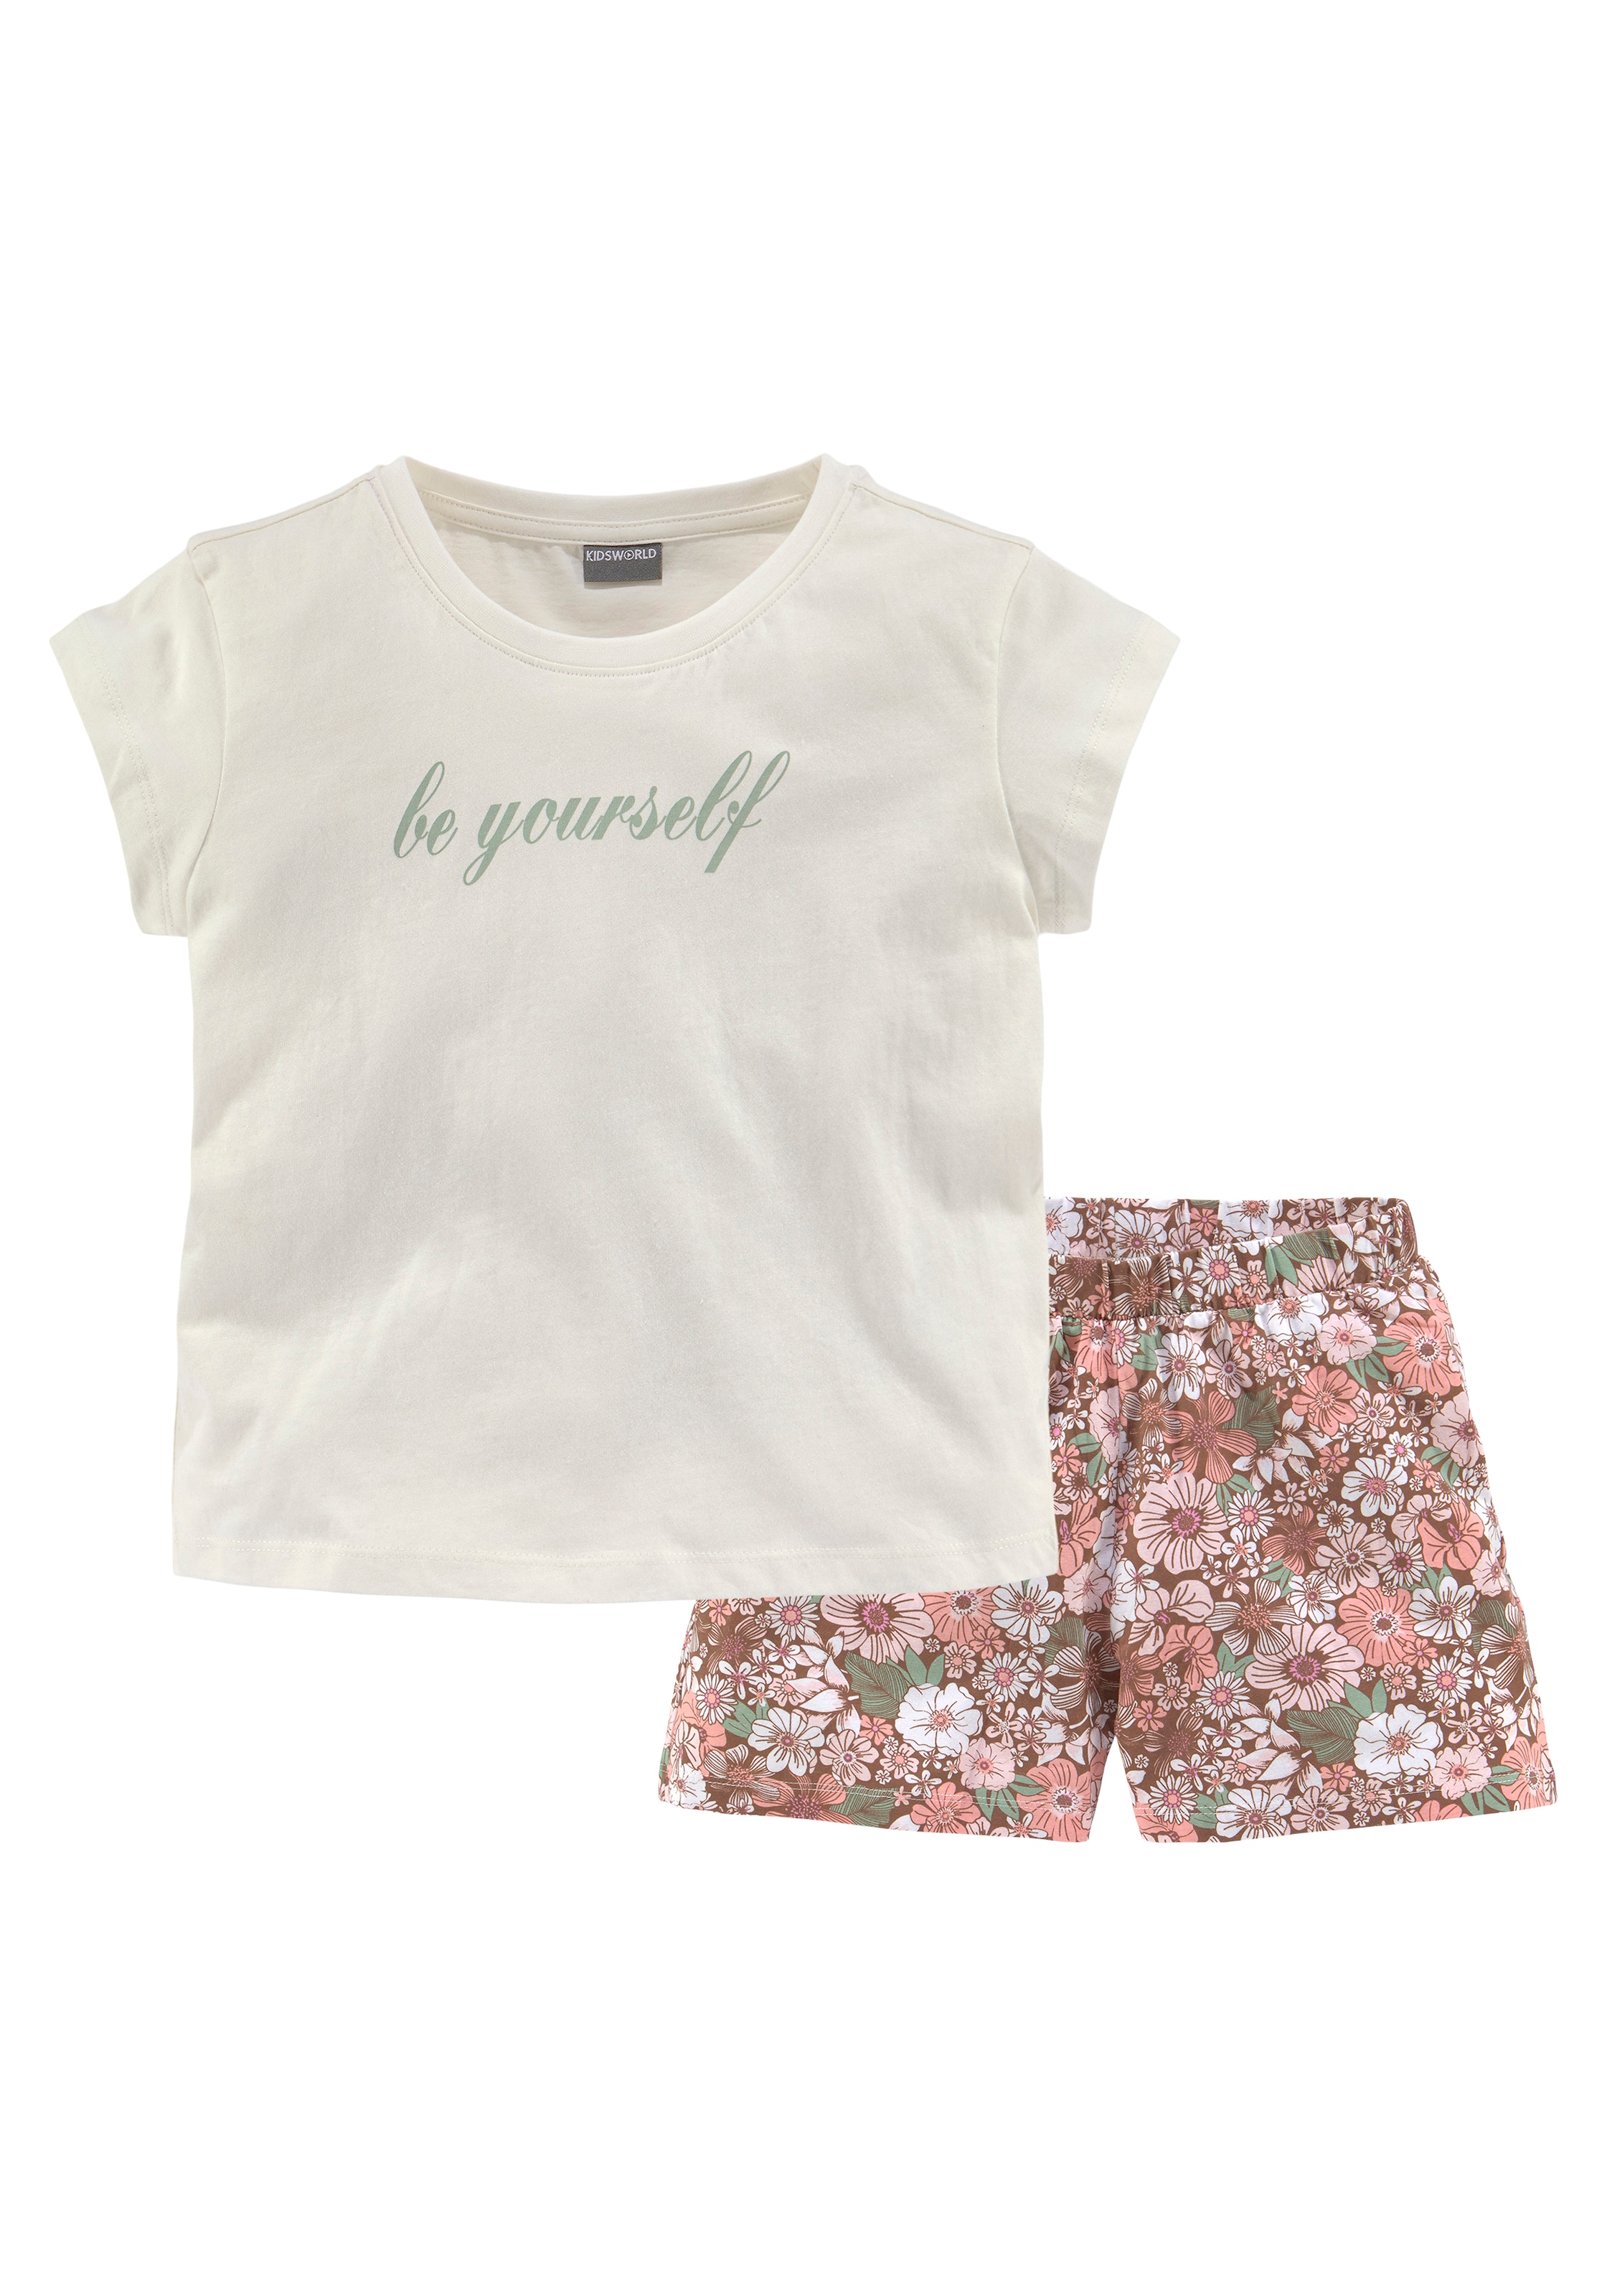 yourself«, tlg.), Sommer/Beach bei & 2 »be KIDSWORLD (Set, Outfit Shirt ♕ Shorts